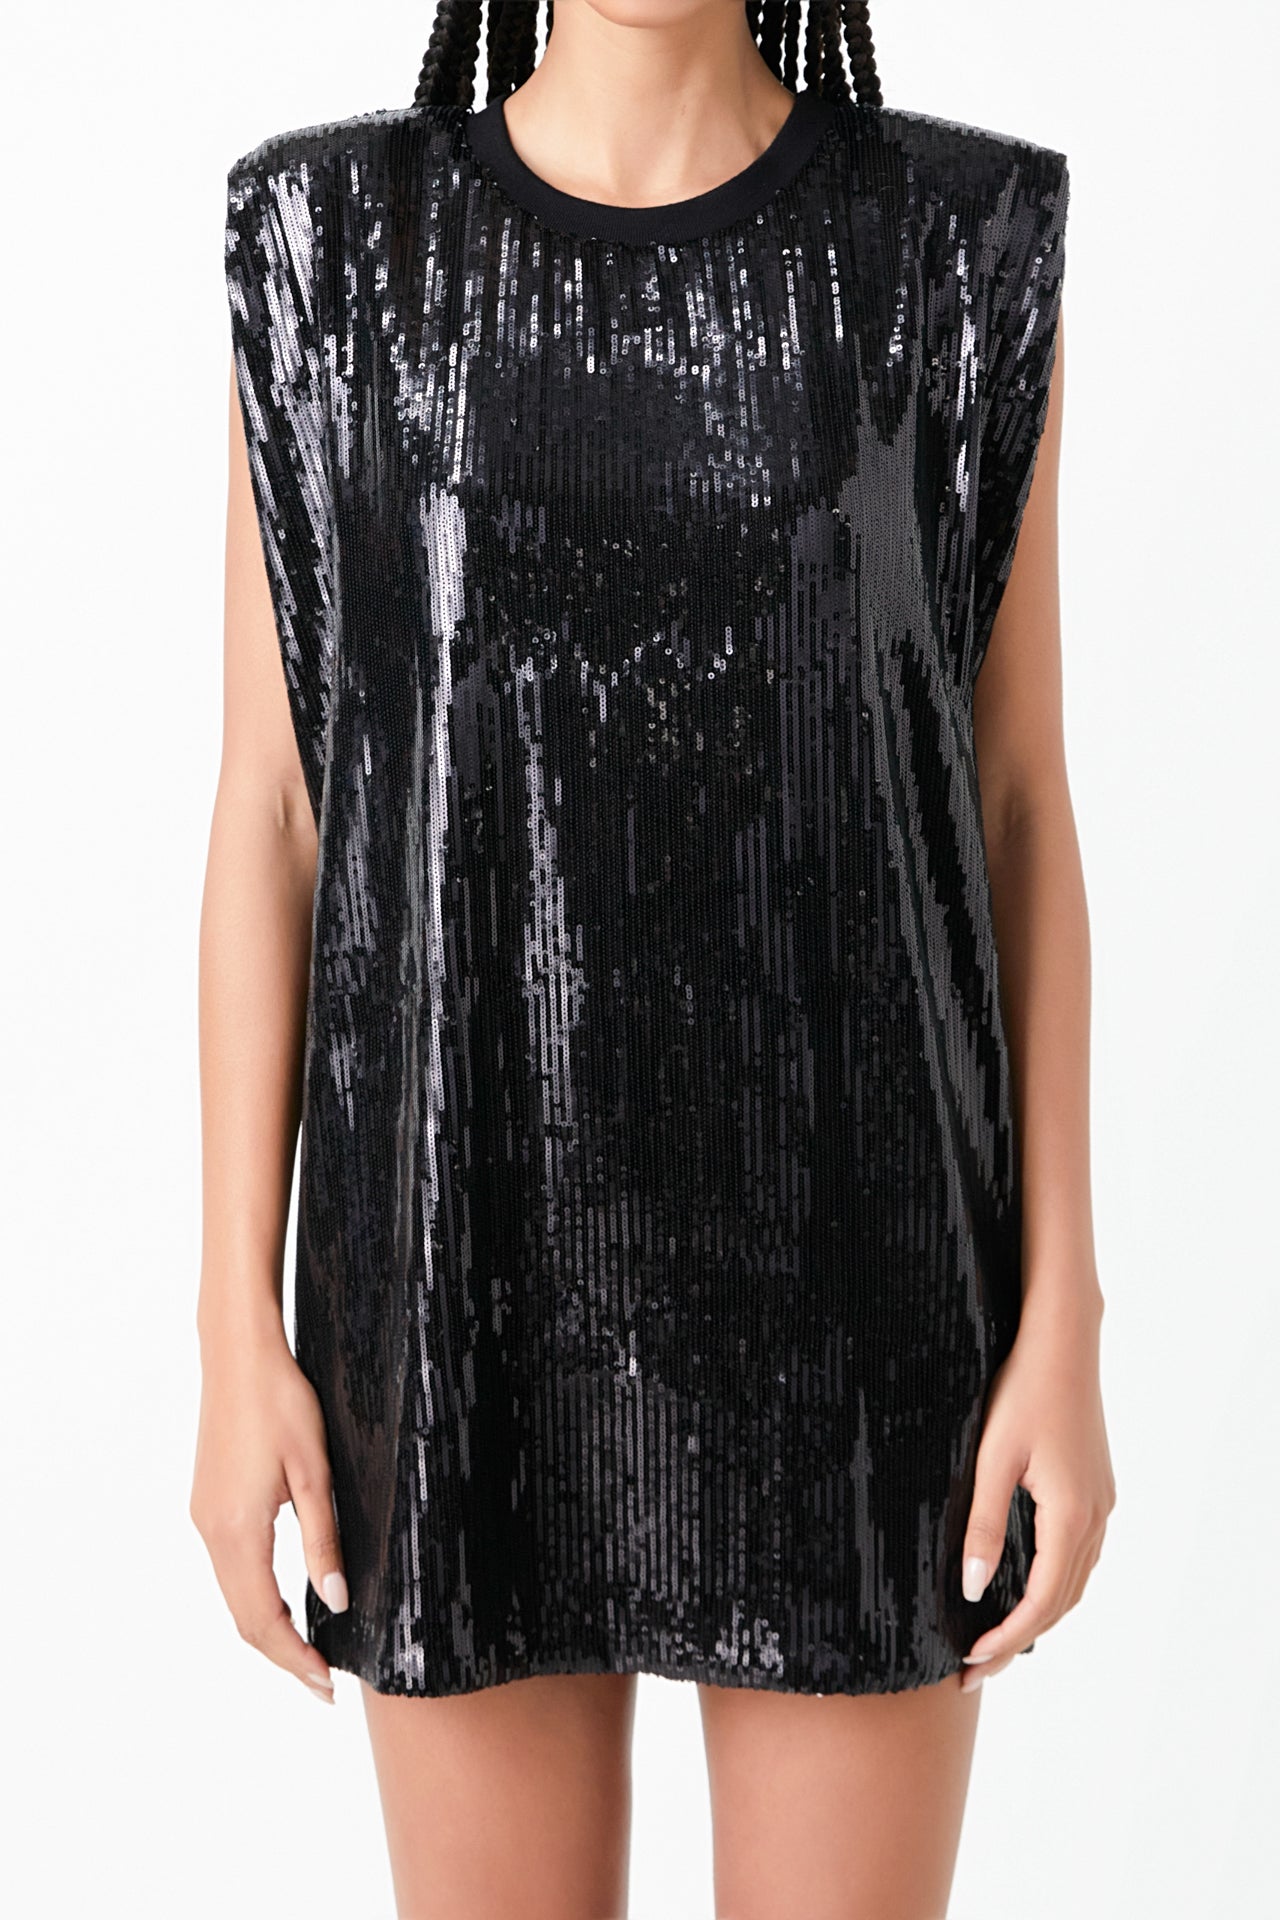 GREY LAB - Sequin Dress - DRESSES available at Objectrare